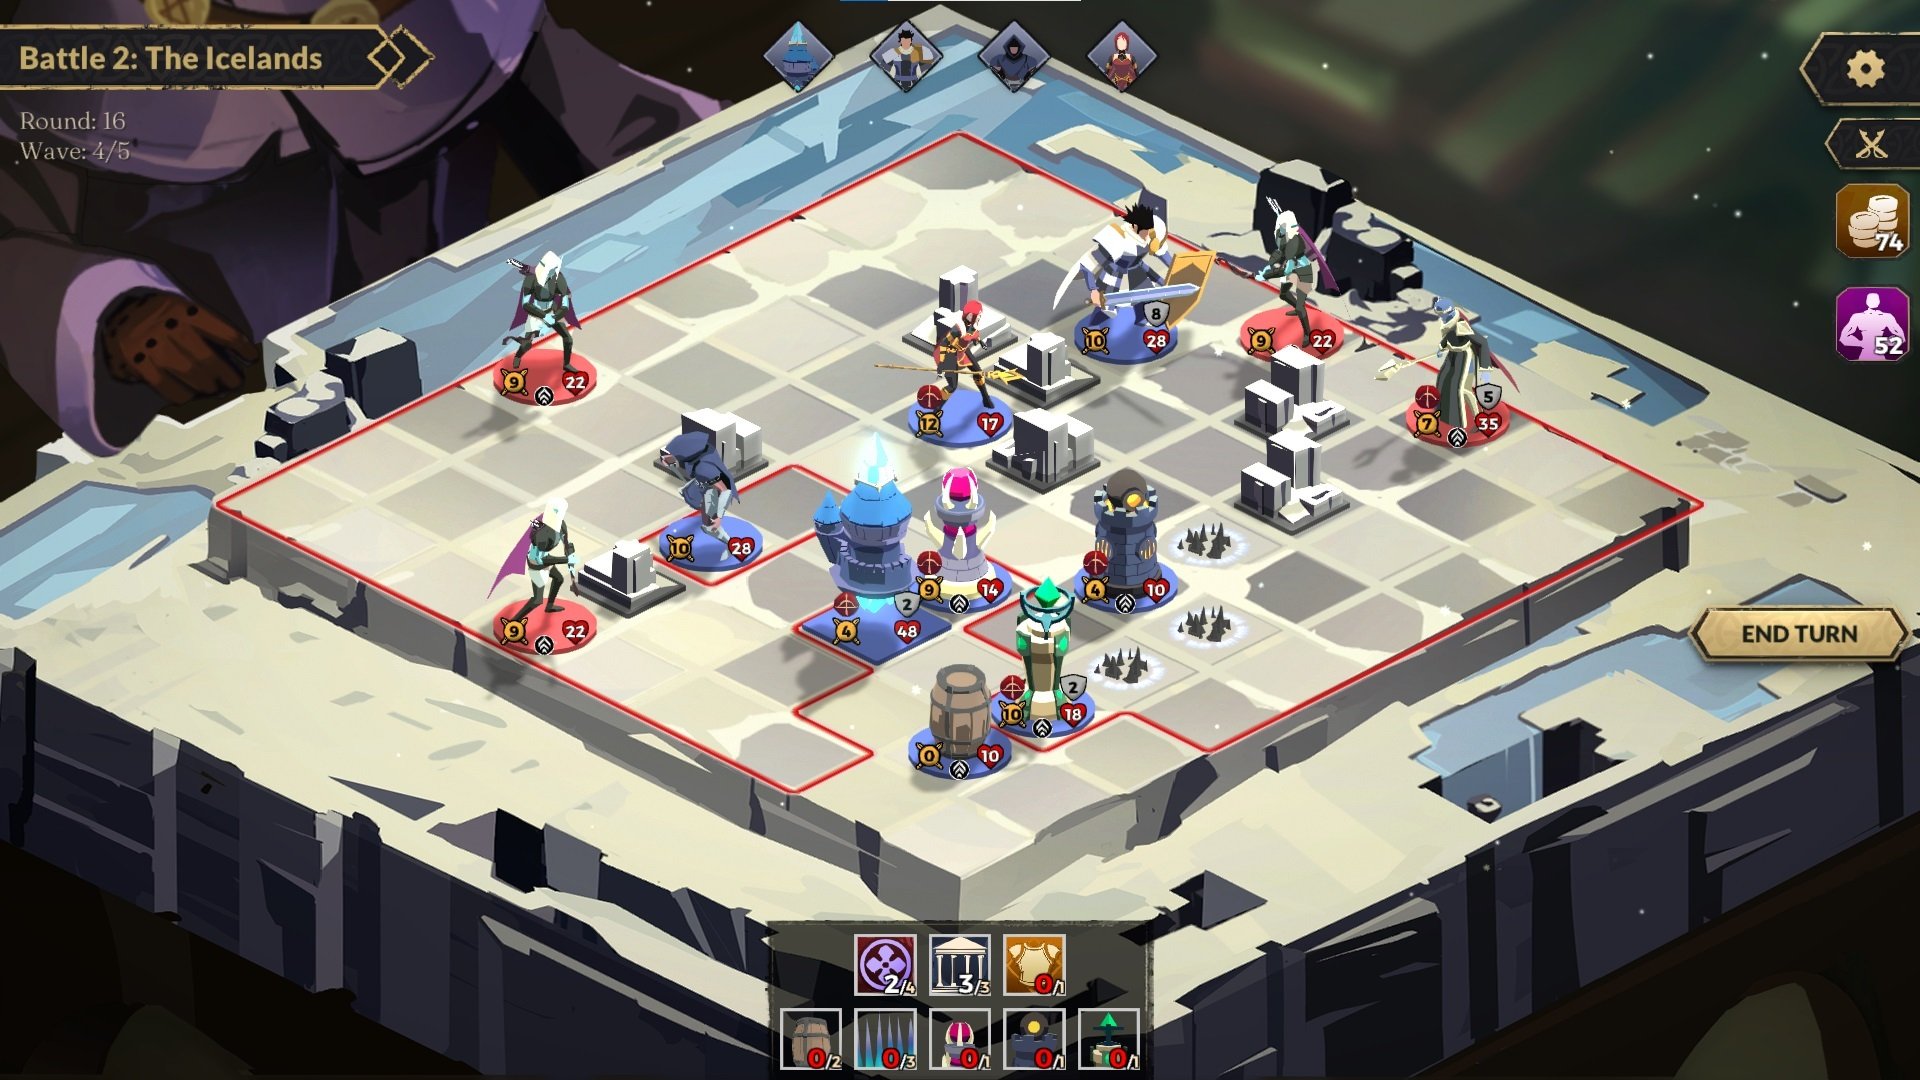 Defend The Rook Is Chess Meets Tower Defense - The Indie Game Website